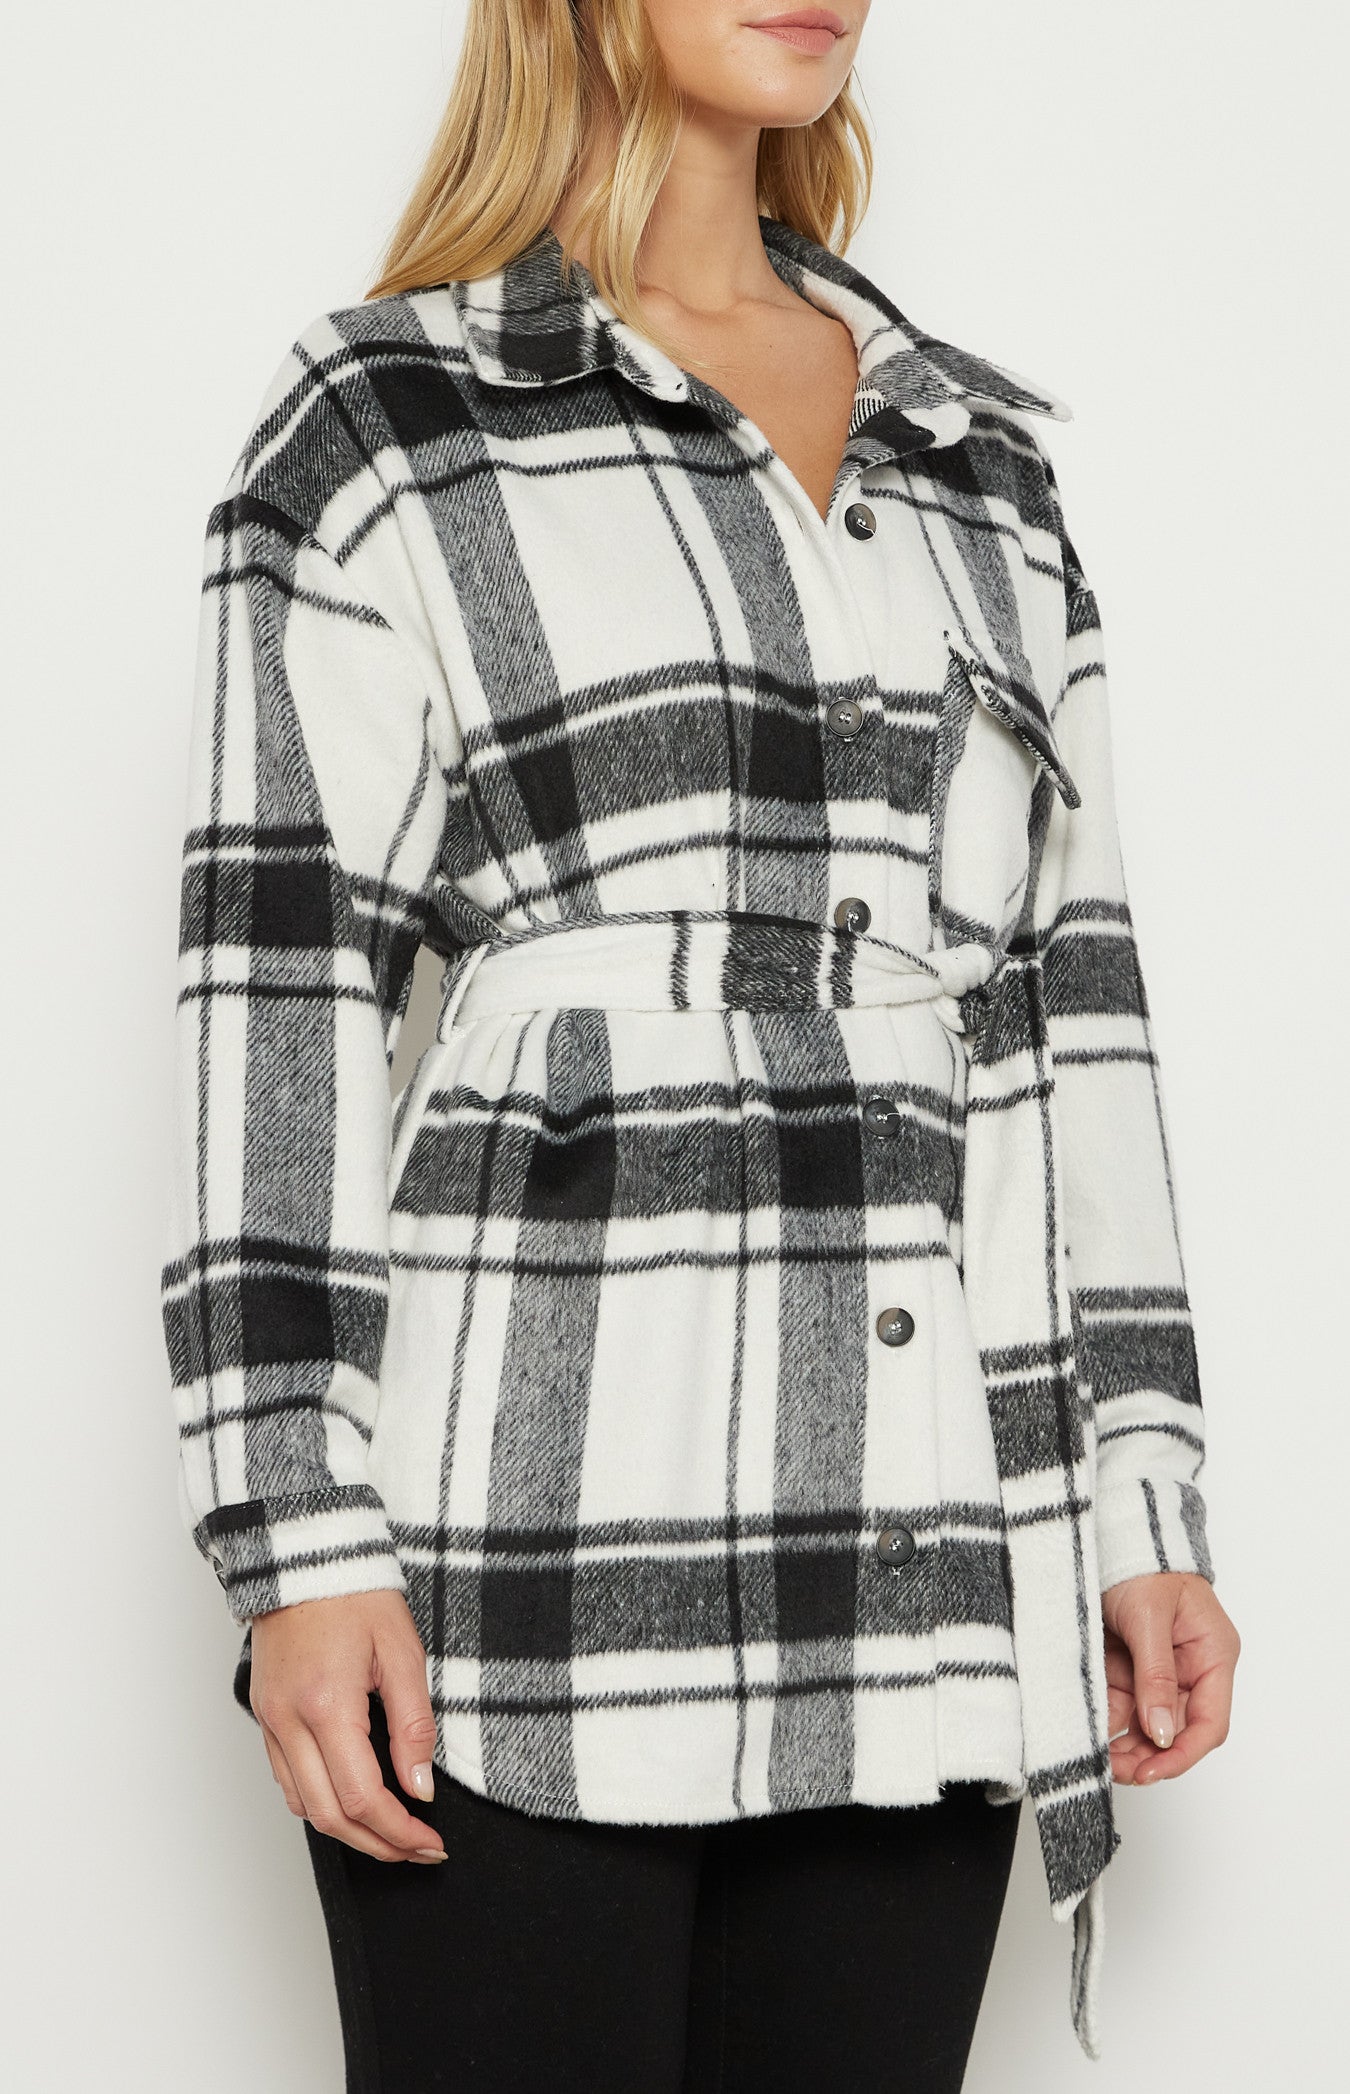 Checkered Button up Jacket with Belt